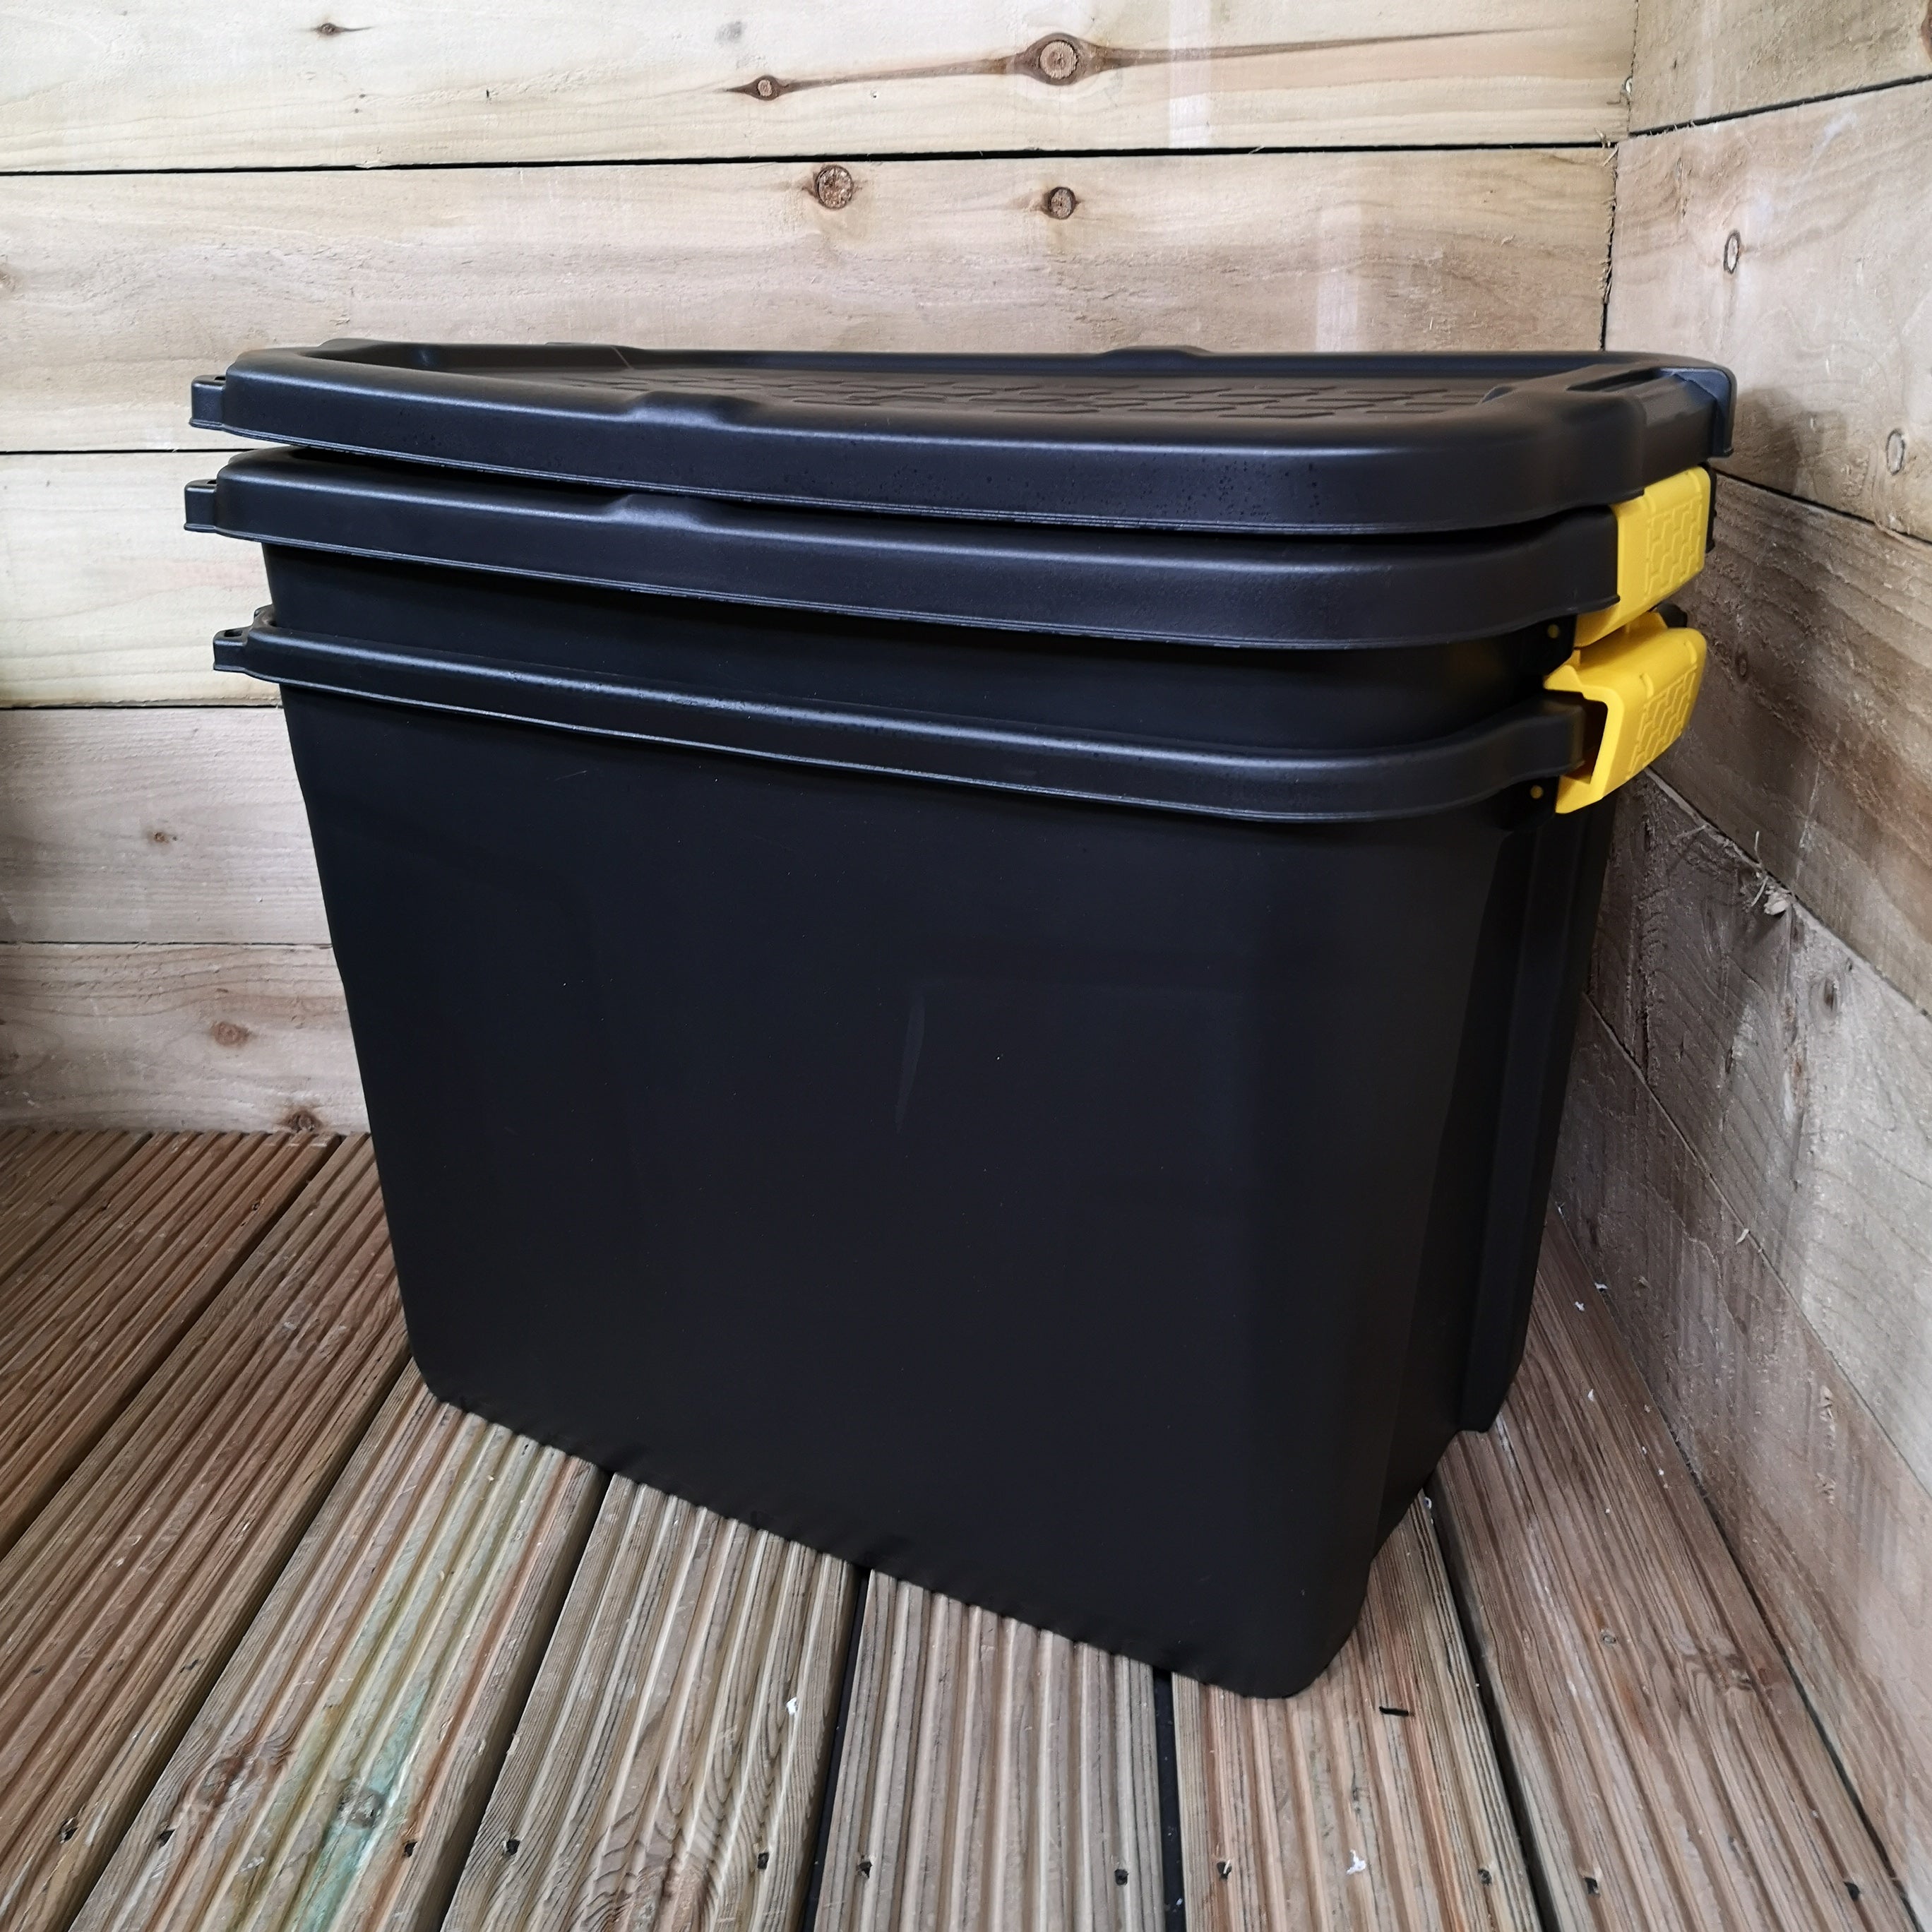 2 x 60L Heavy Duty Storage Tubs Sturdy, Lockable, Stackable and Nestable Design Storage Chests with Clips in Black